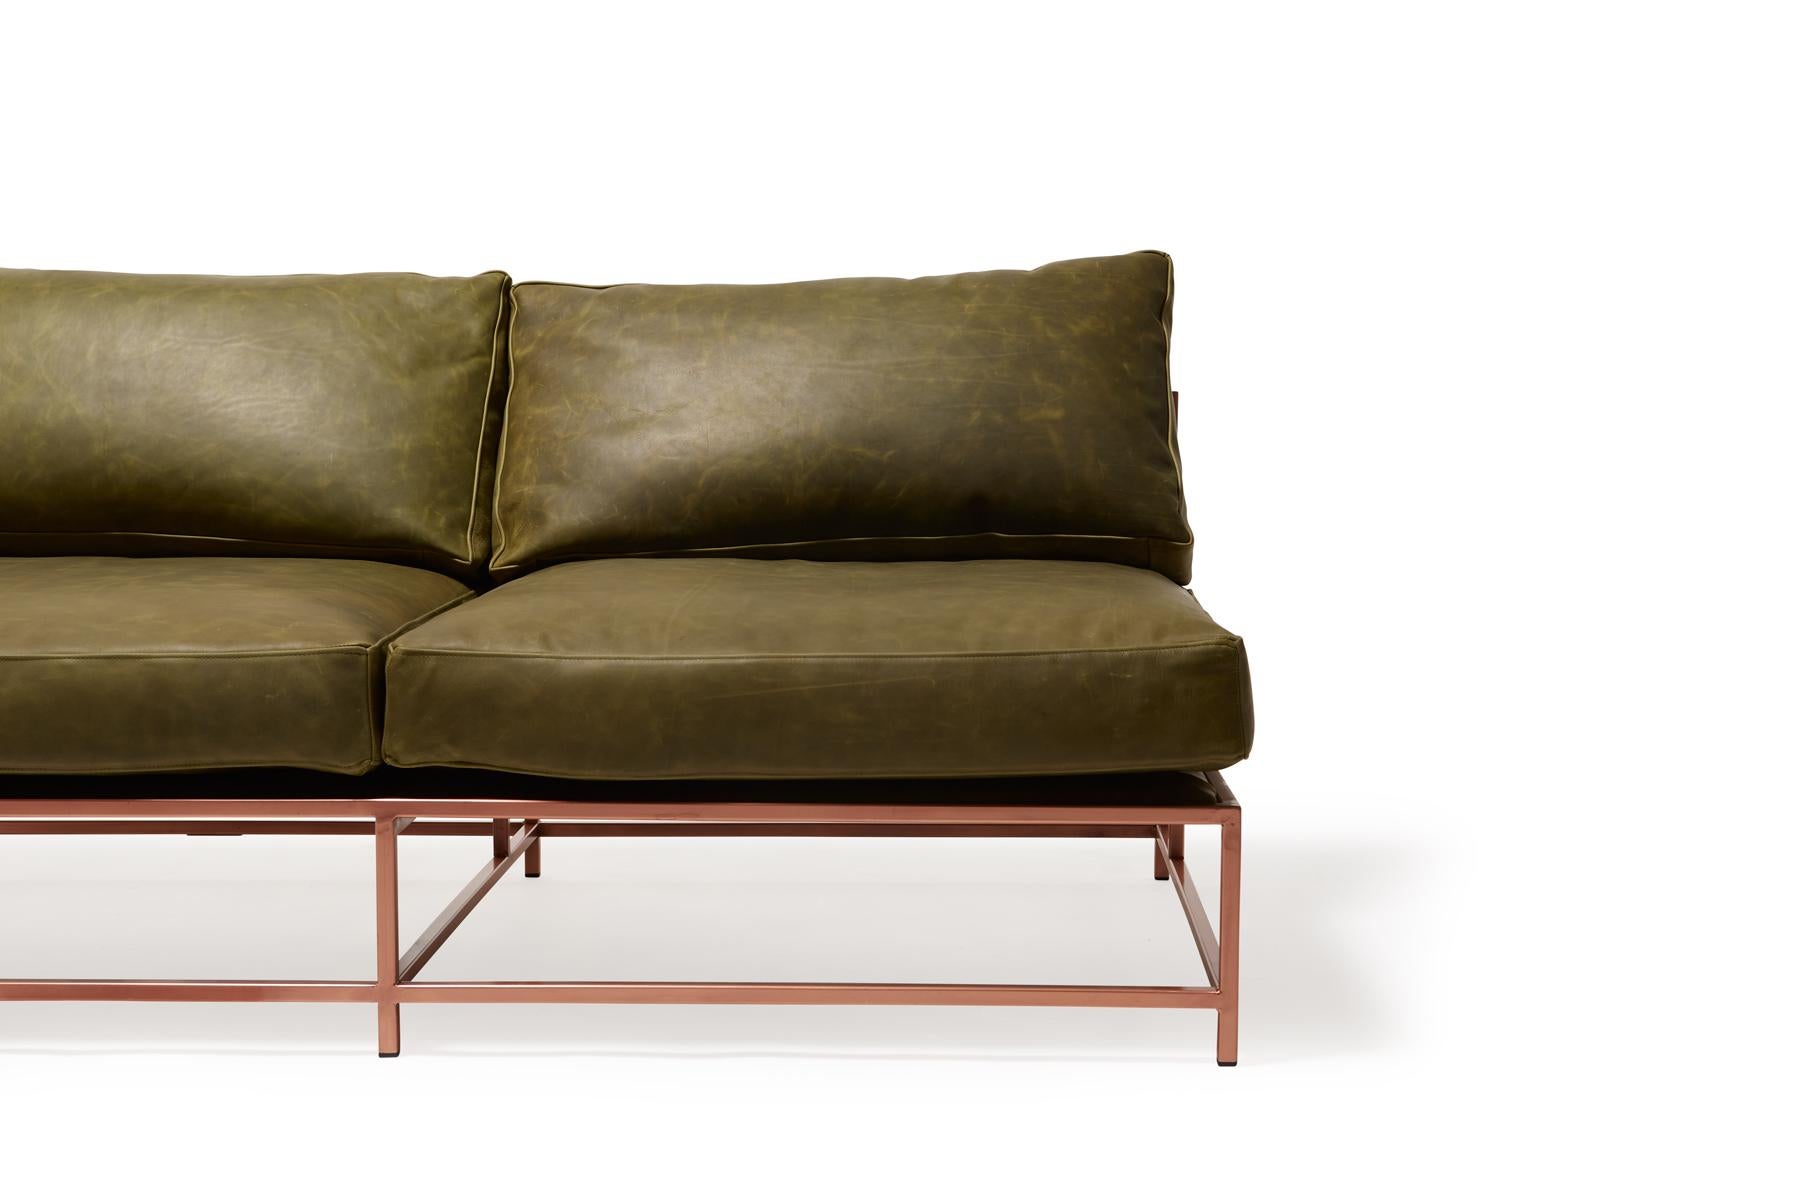 Metalwork Waxed Moss Green Leather and Antique Copper Loveseat For Sale